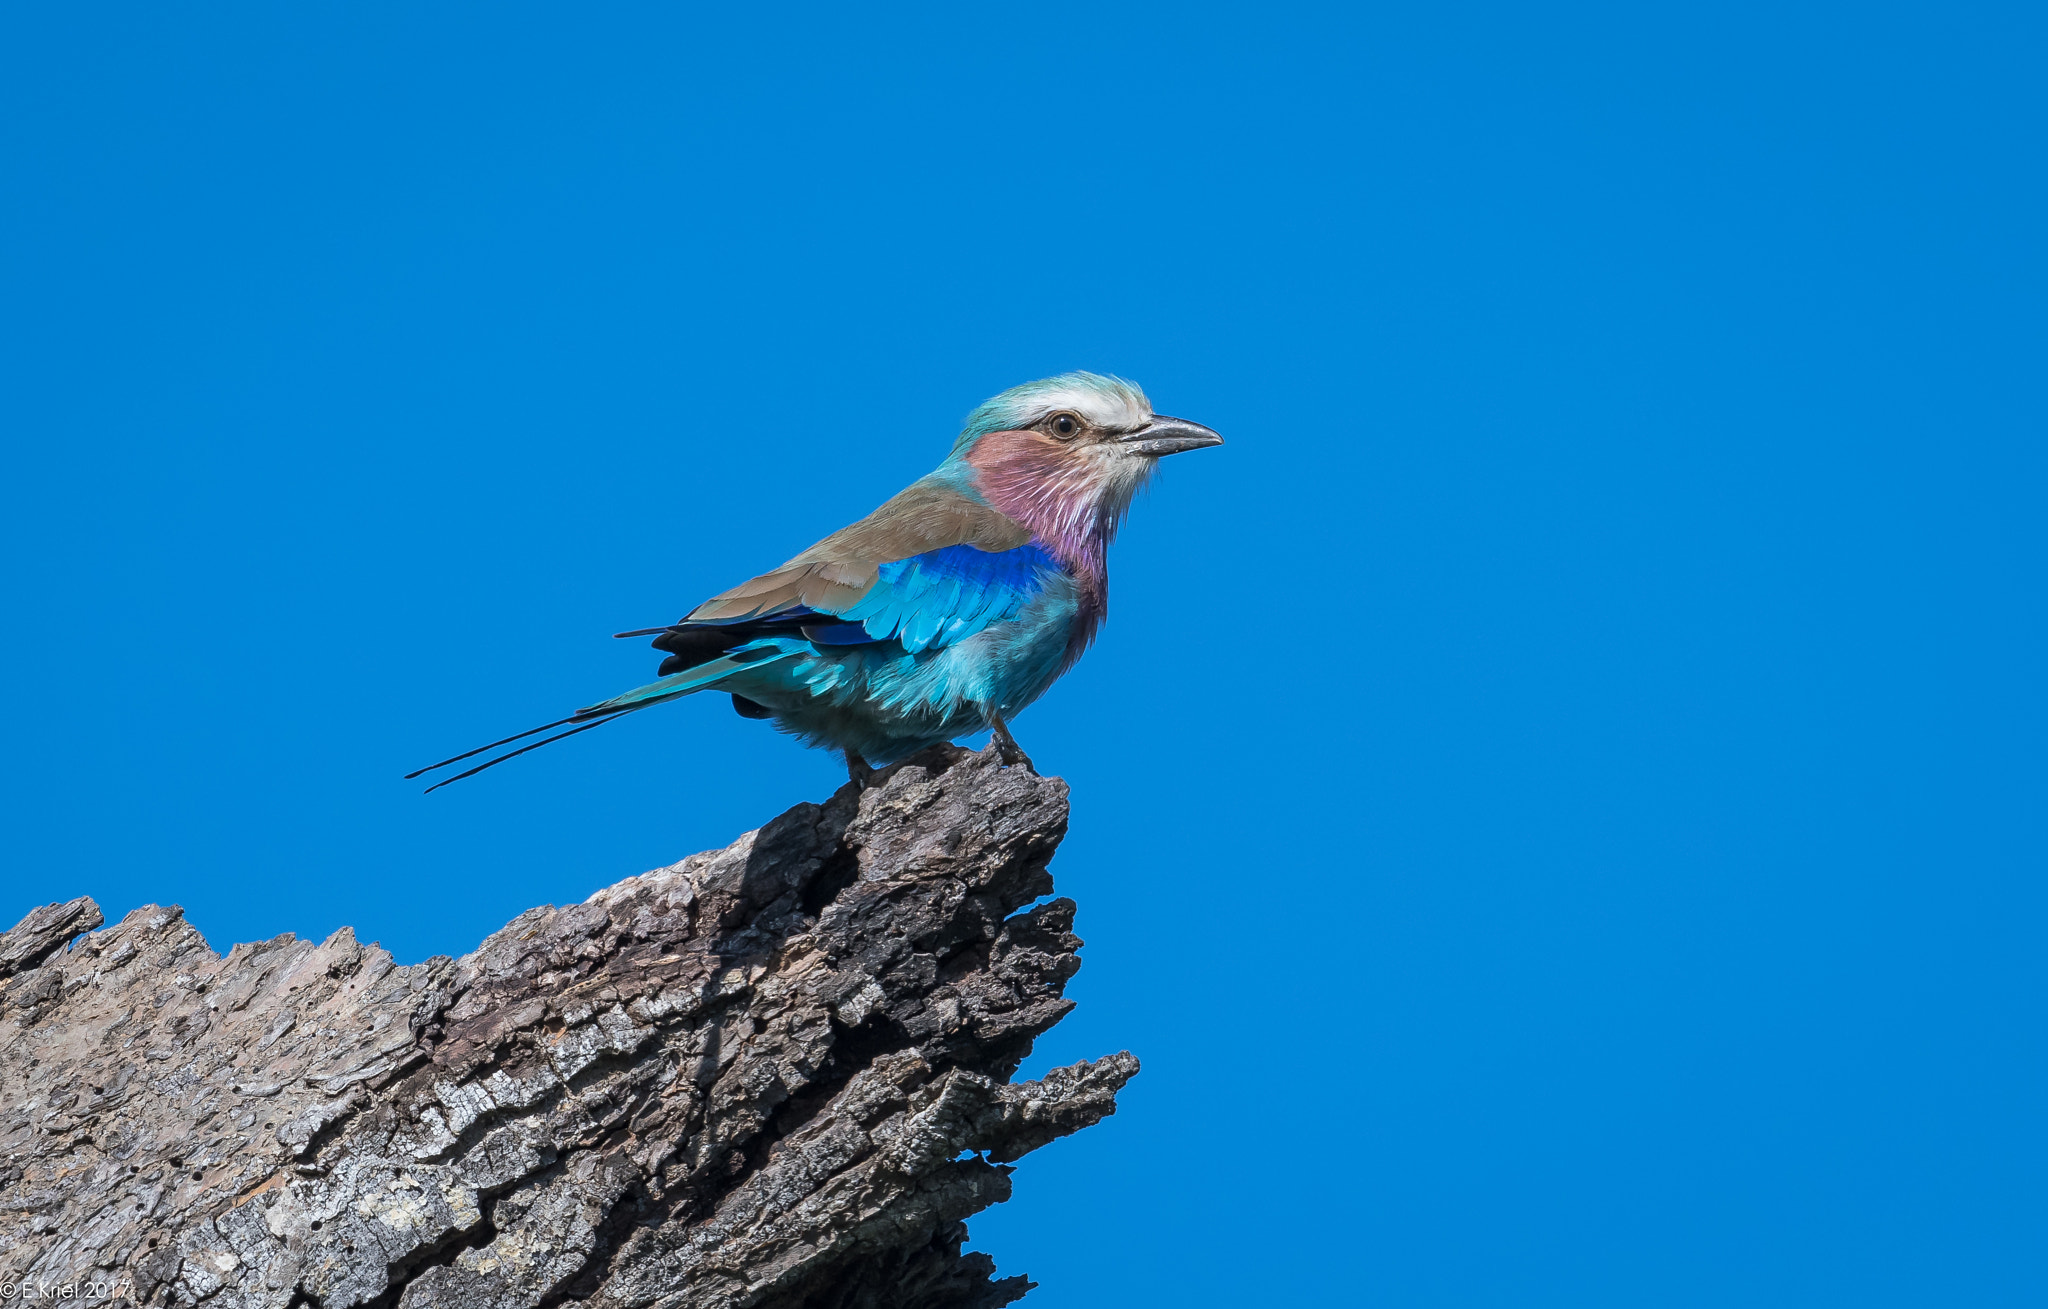 Nikon D500 sample photo. Safari trip march 2017 - lilac breasted roller photography